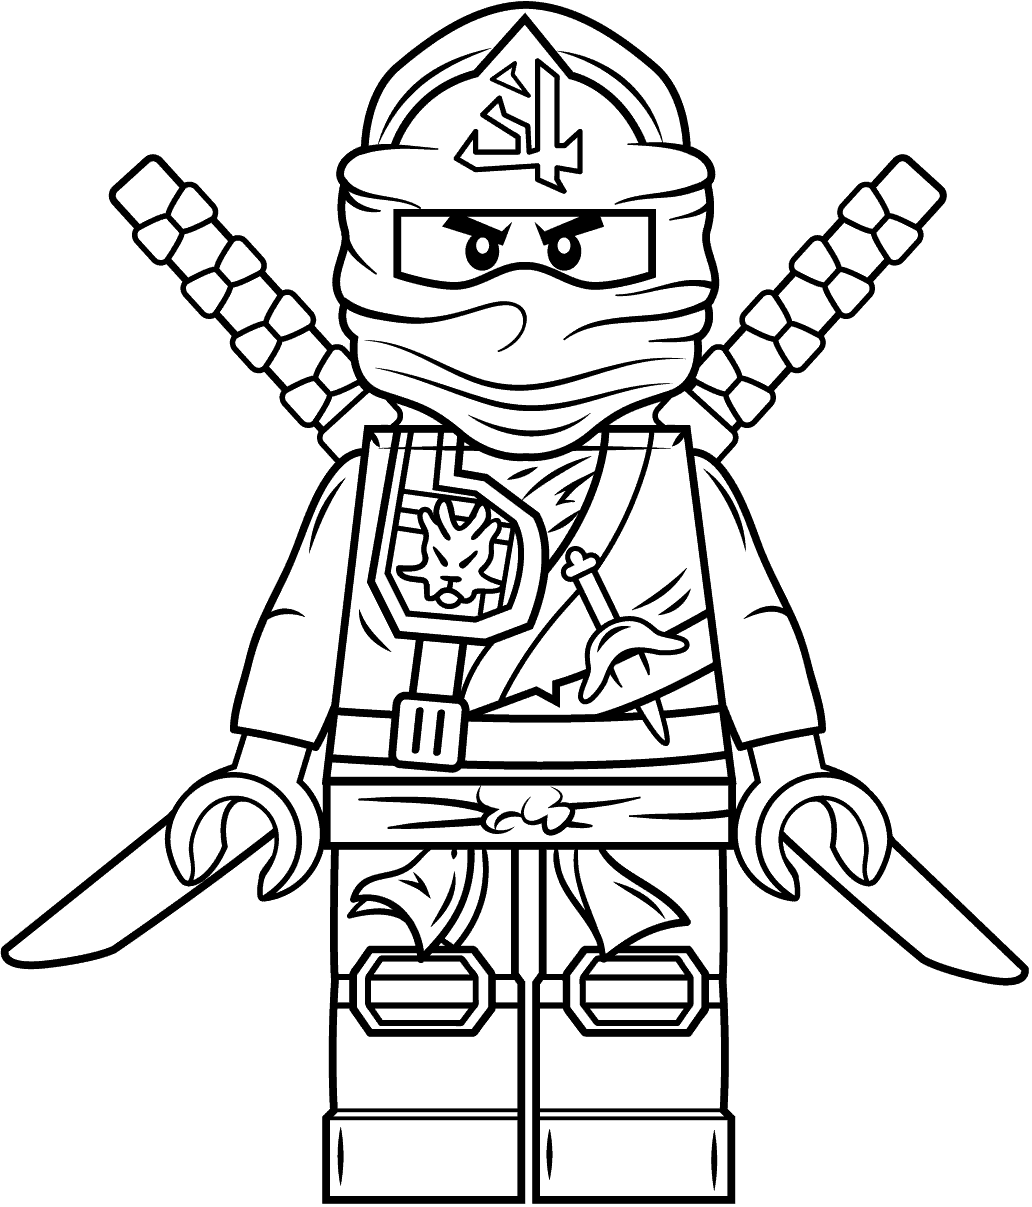 Lego Ninjago Coloring Pages   Free Printable Coloring Pages for Kids